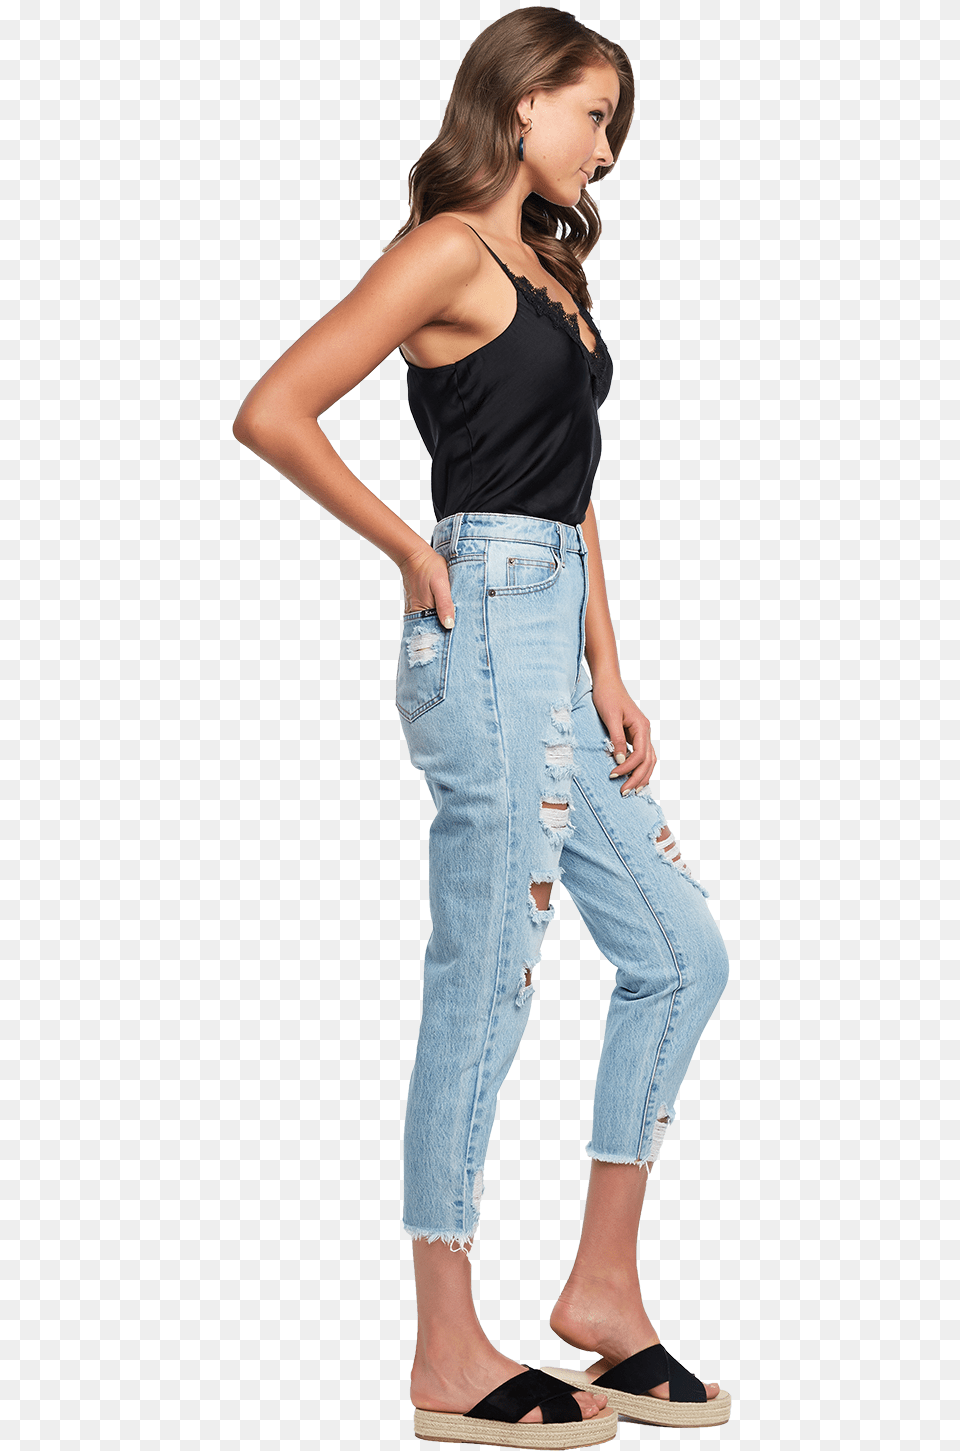 Lace Trim Cami In Colour Caviar, Clothing, Pants, Jeans, Girl Png